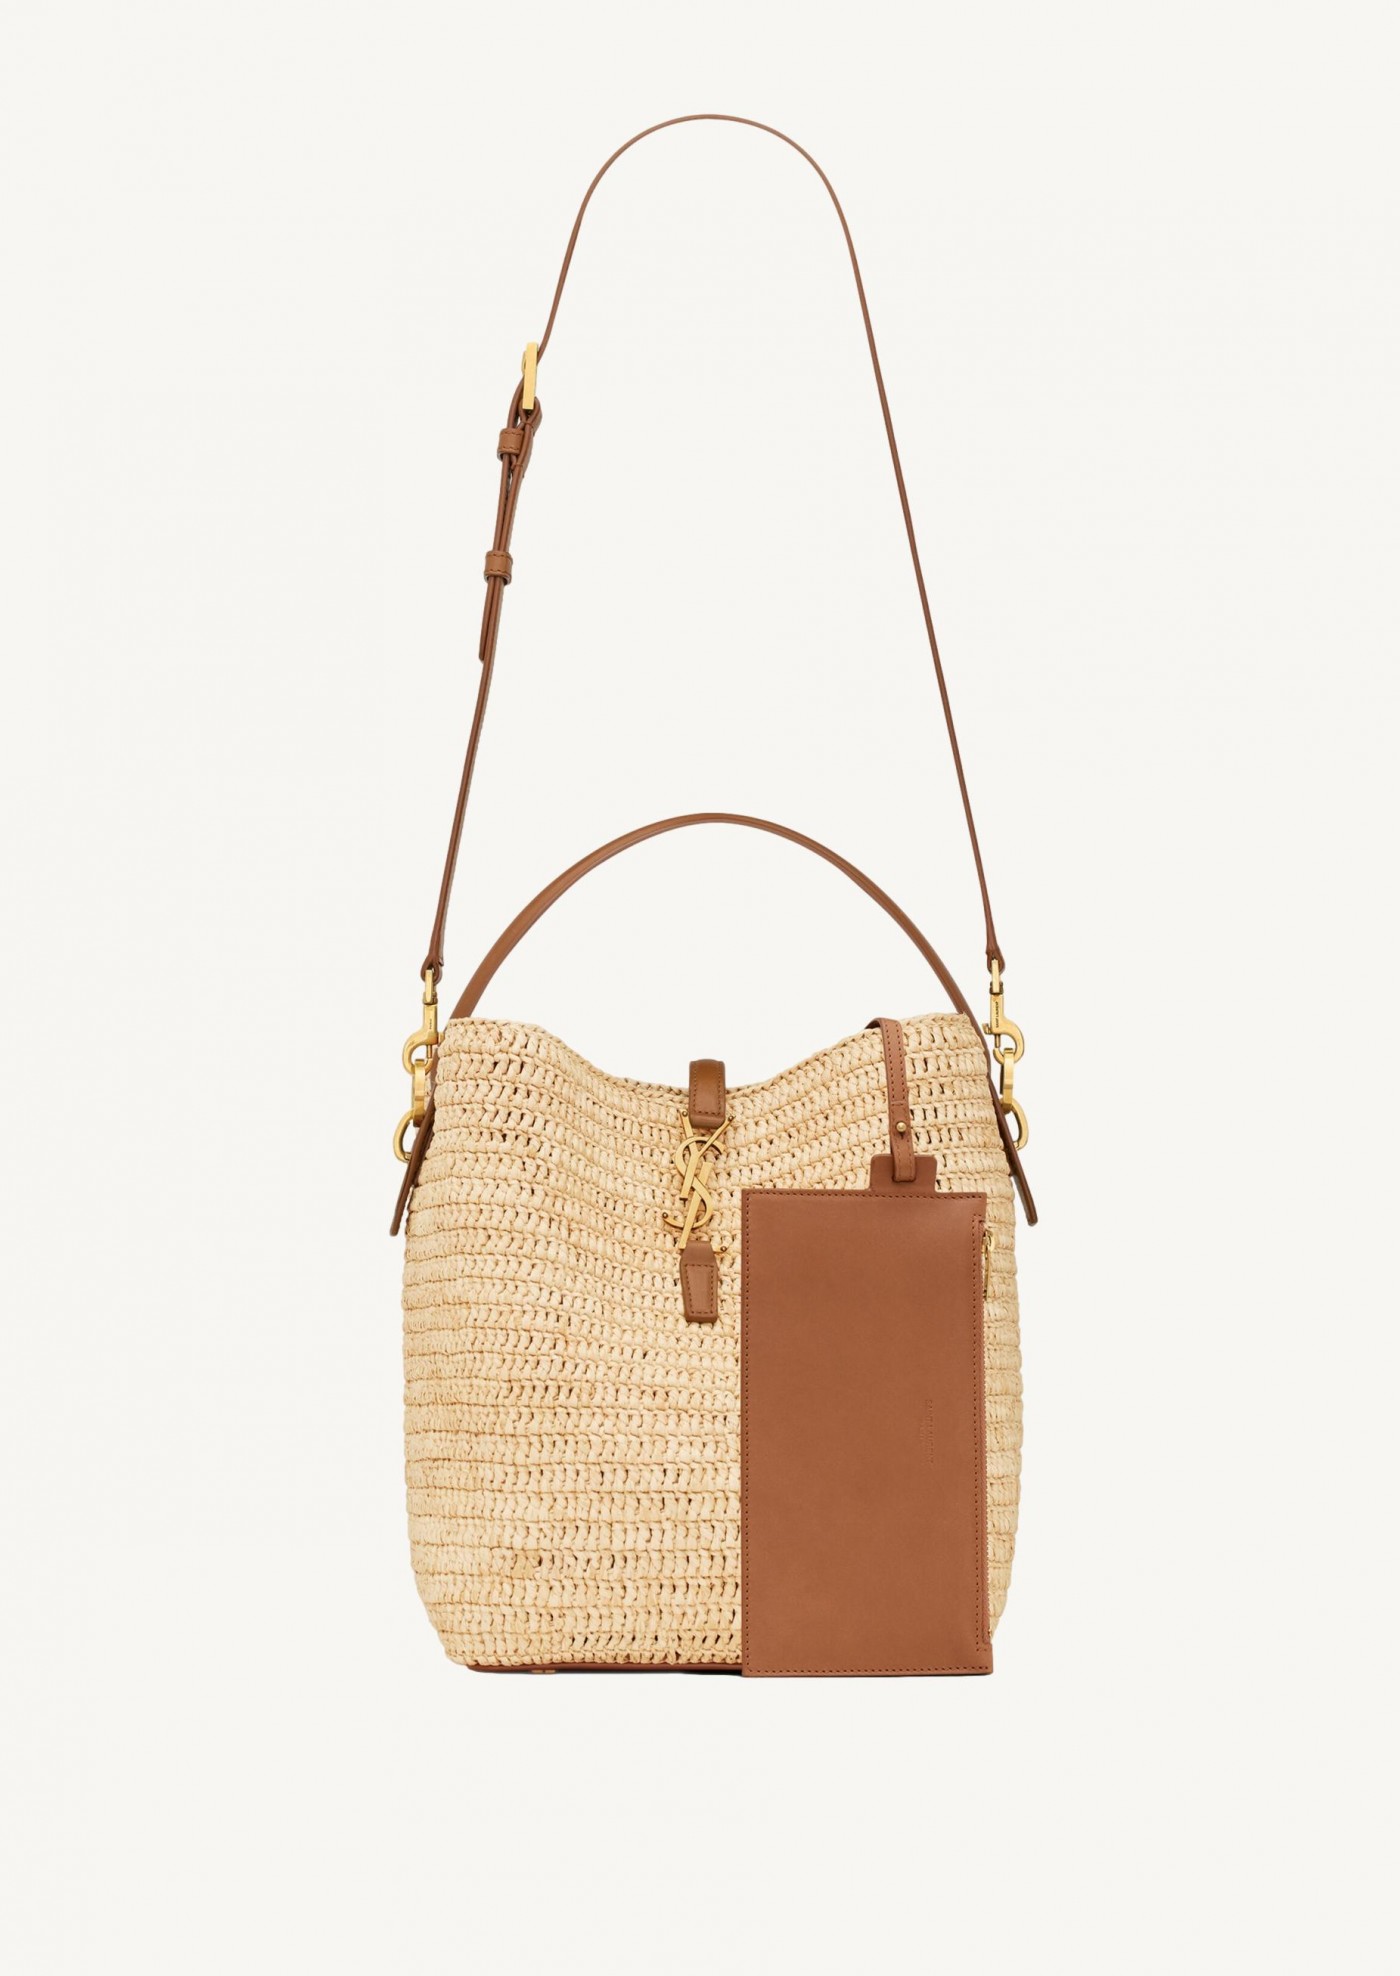 The 37 in raffia and natural leather